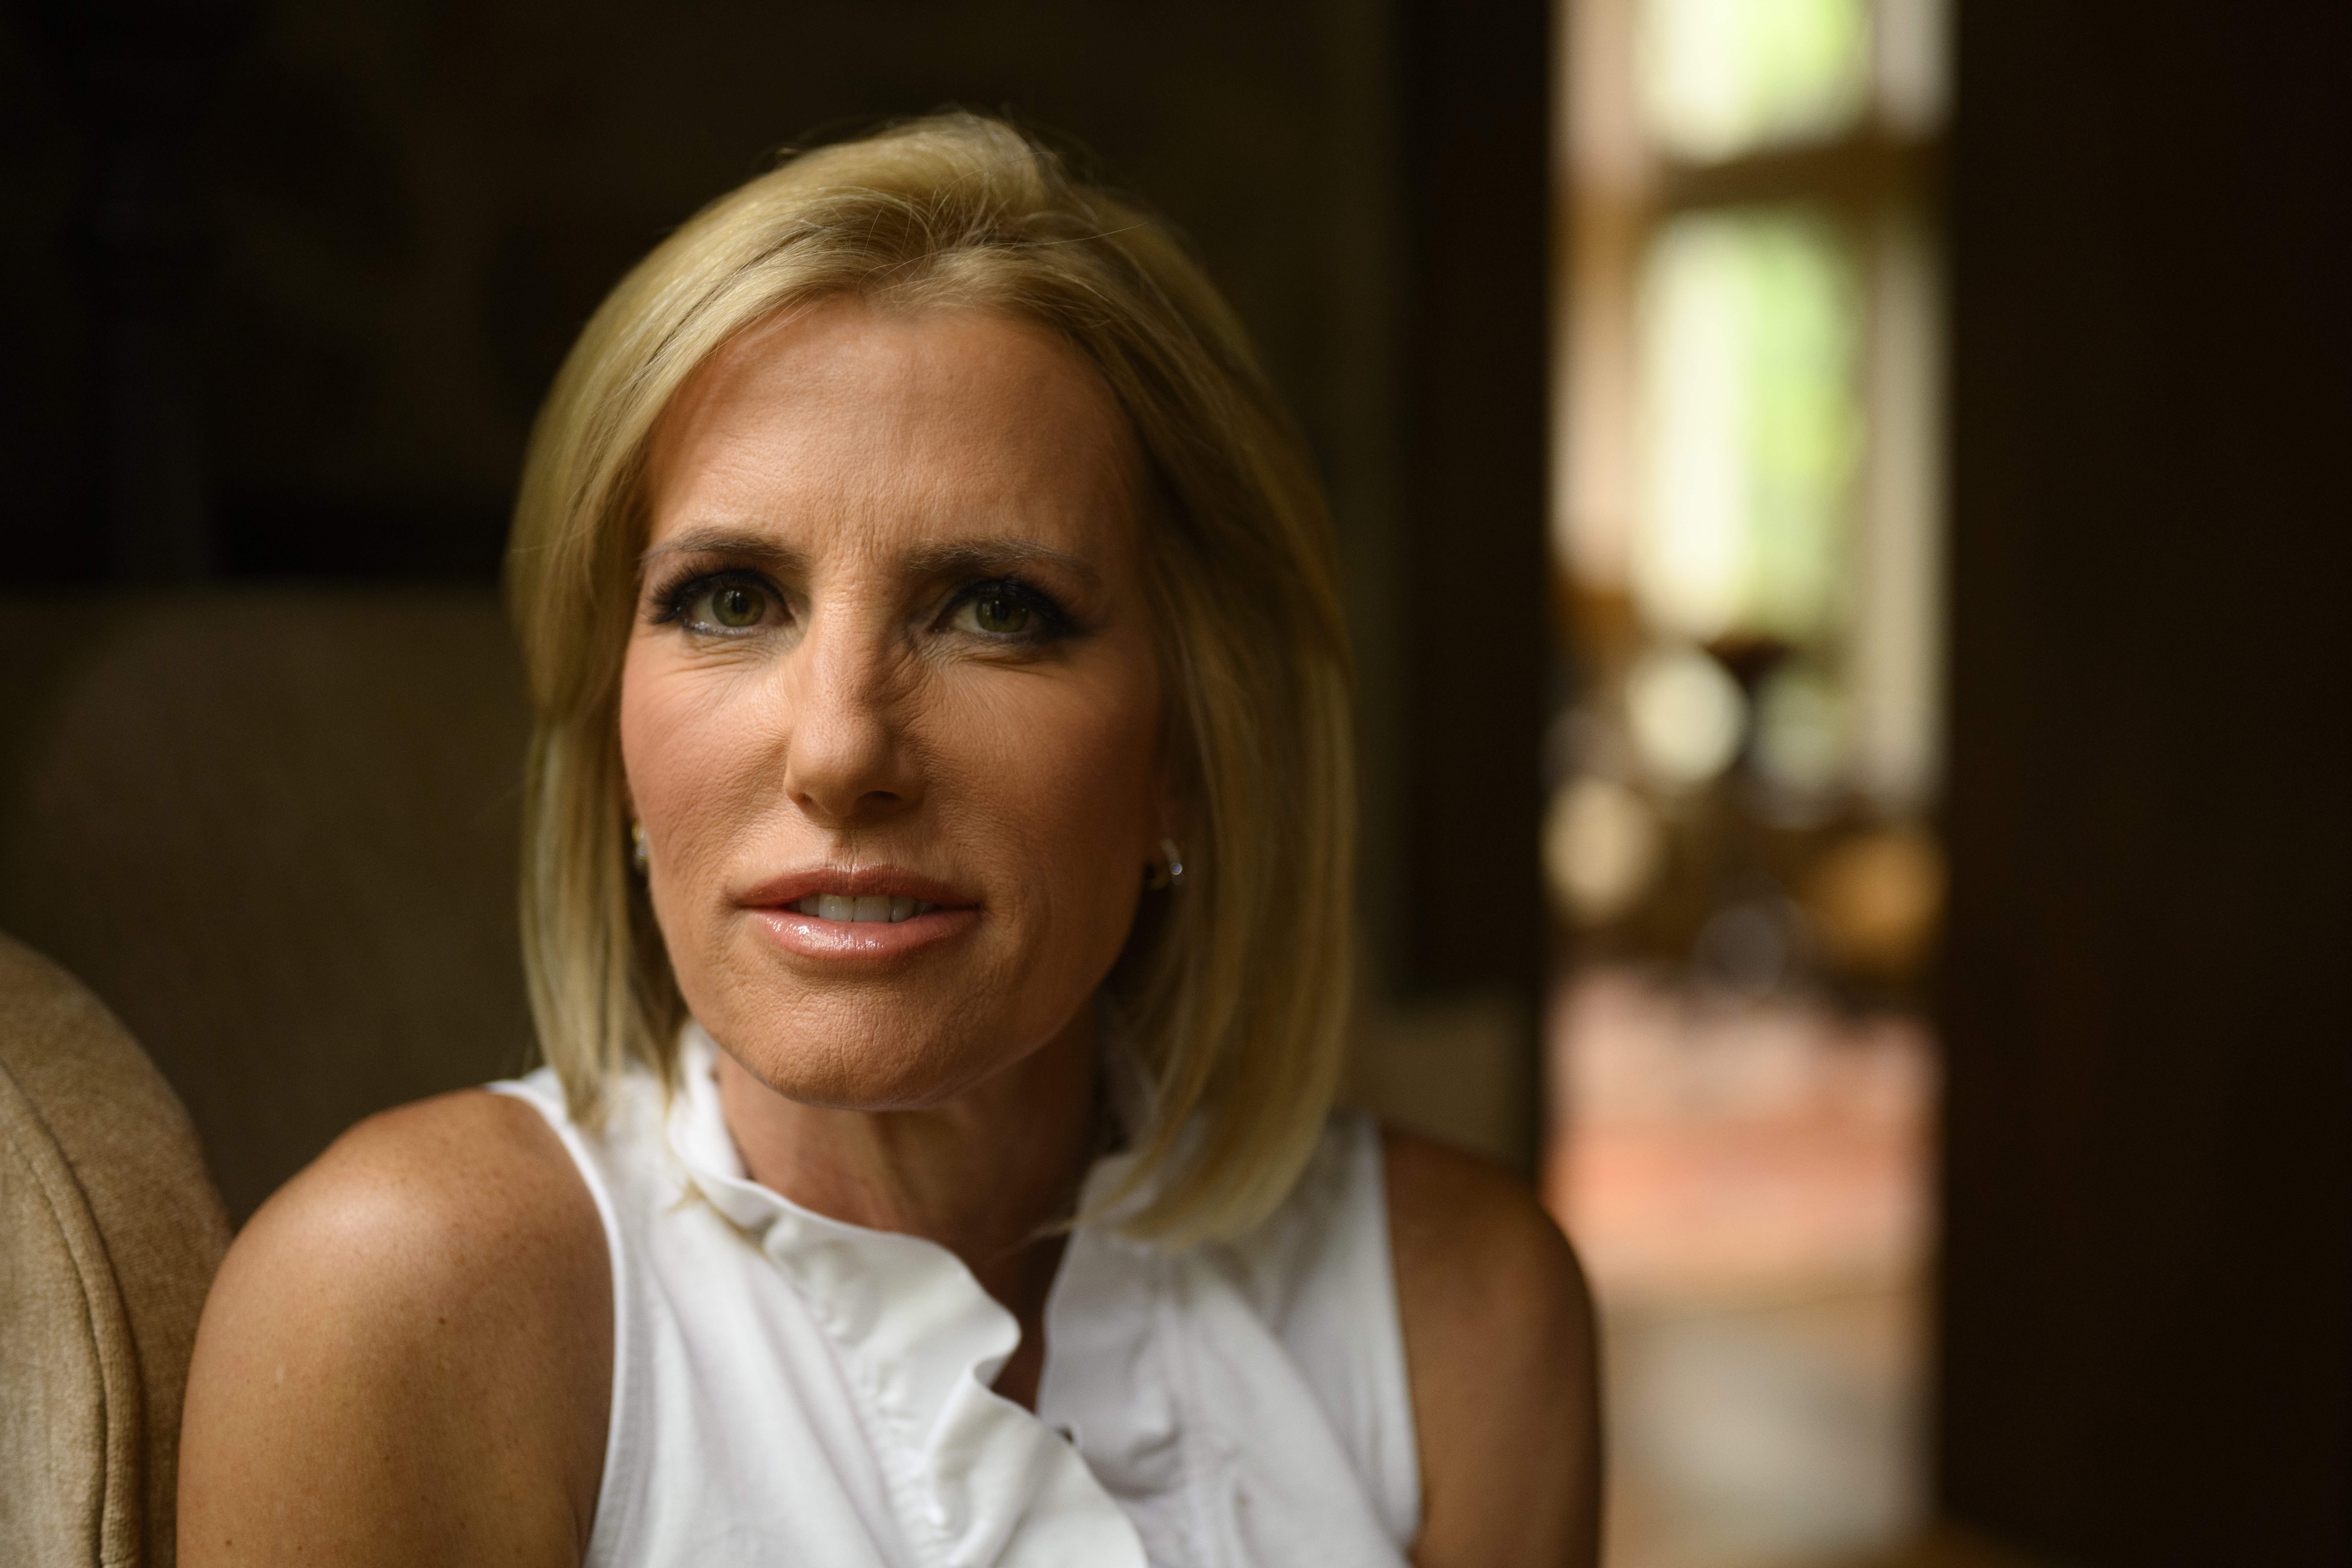 Laura Ingraham photographed at a friends home in McLean,Virginia in September 2021. |  Source: Getty Images